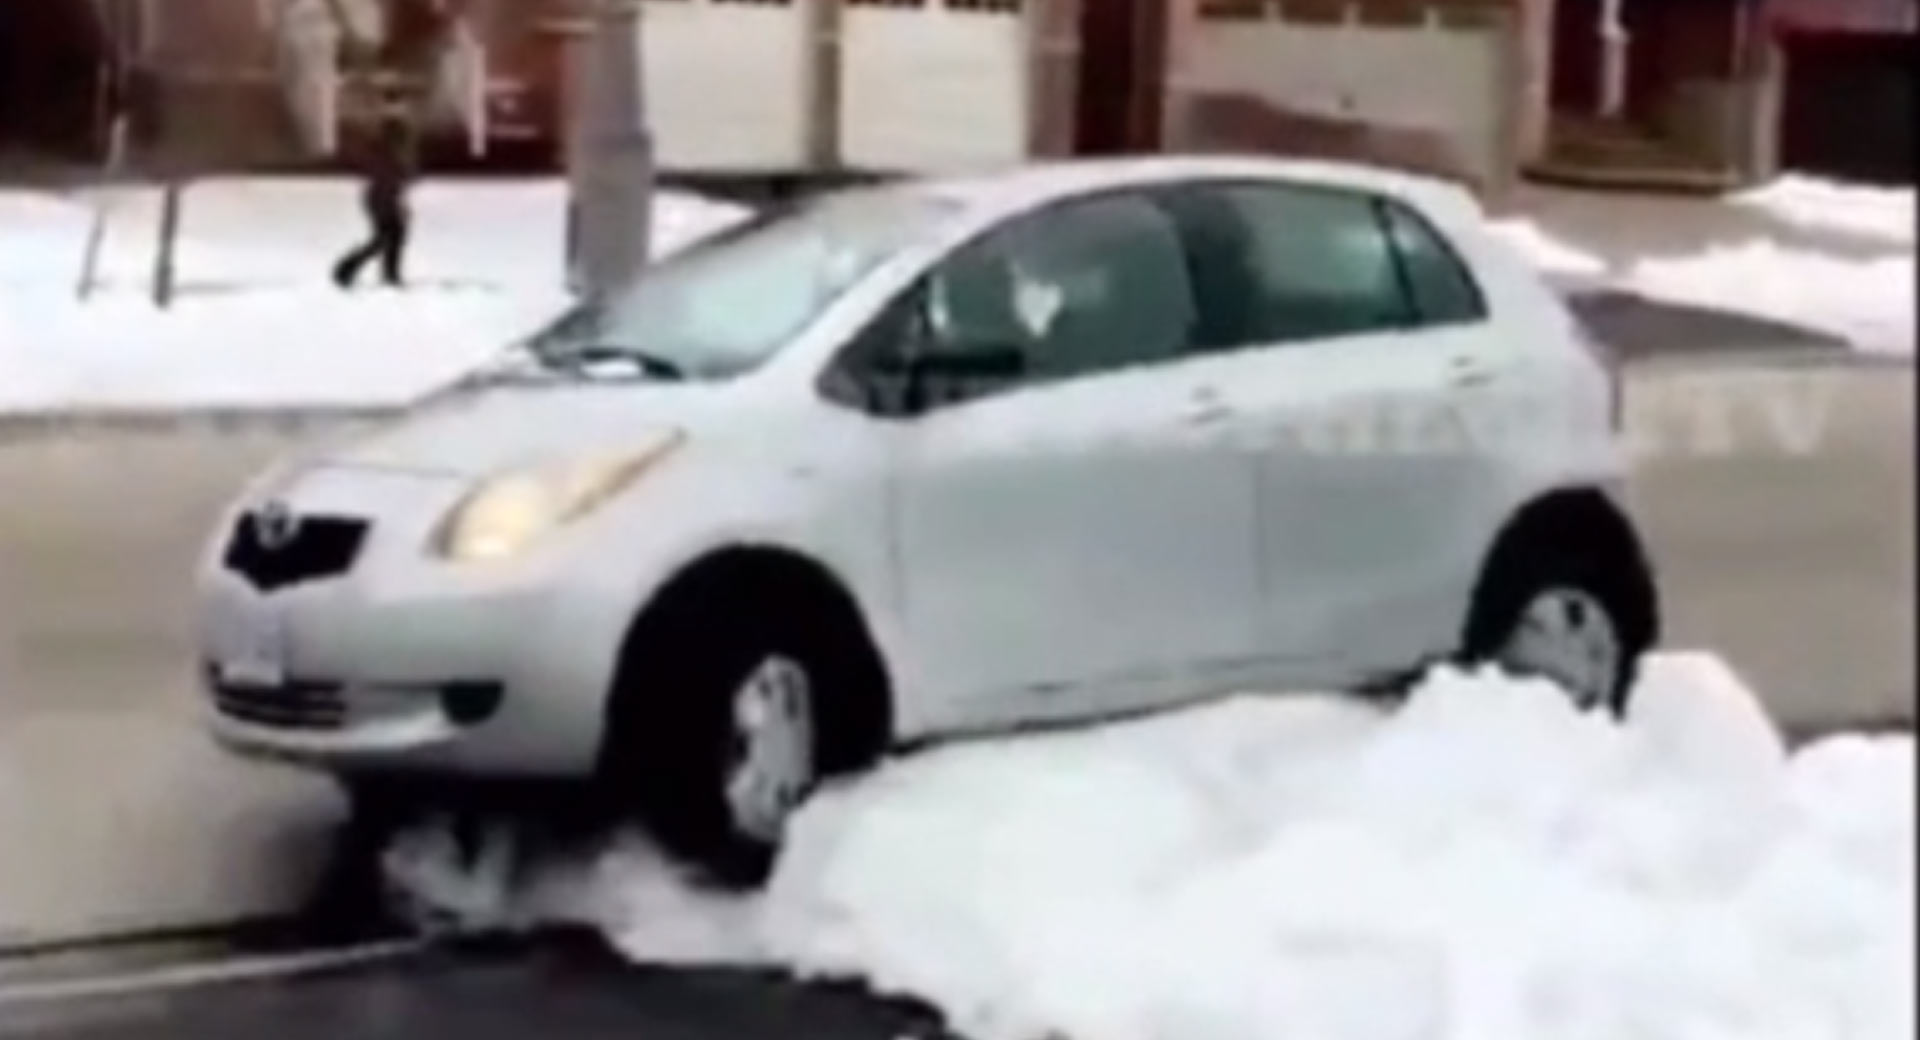 Porch pirate gets instant karma as his car gets stuck in the snow trying to escape